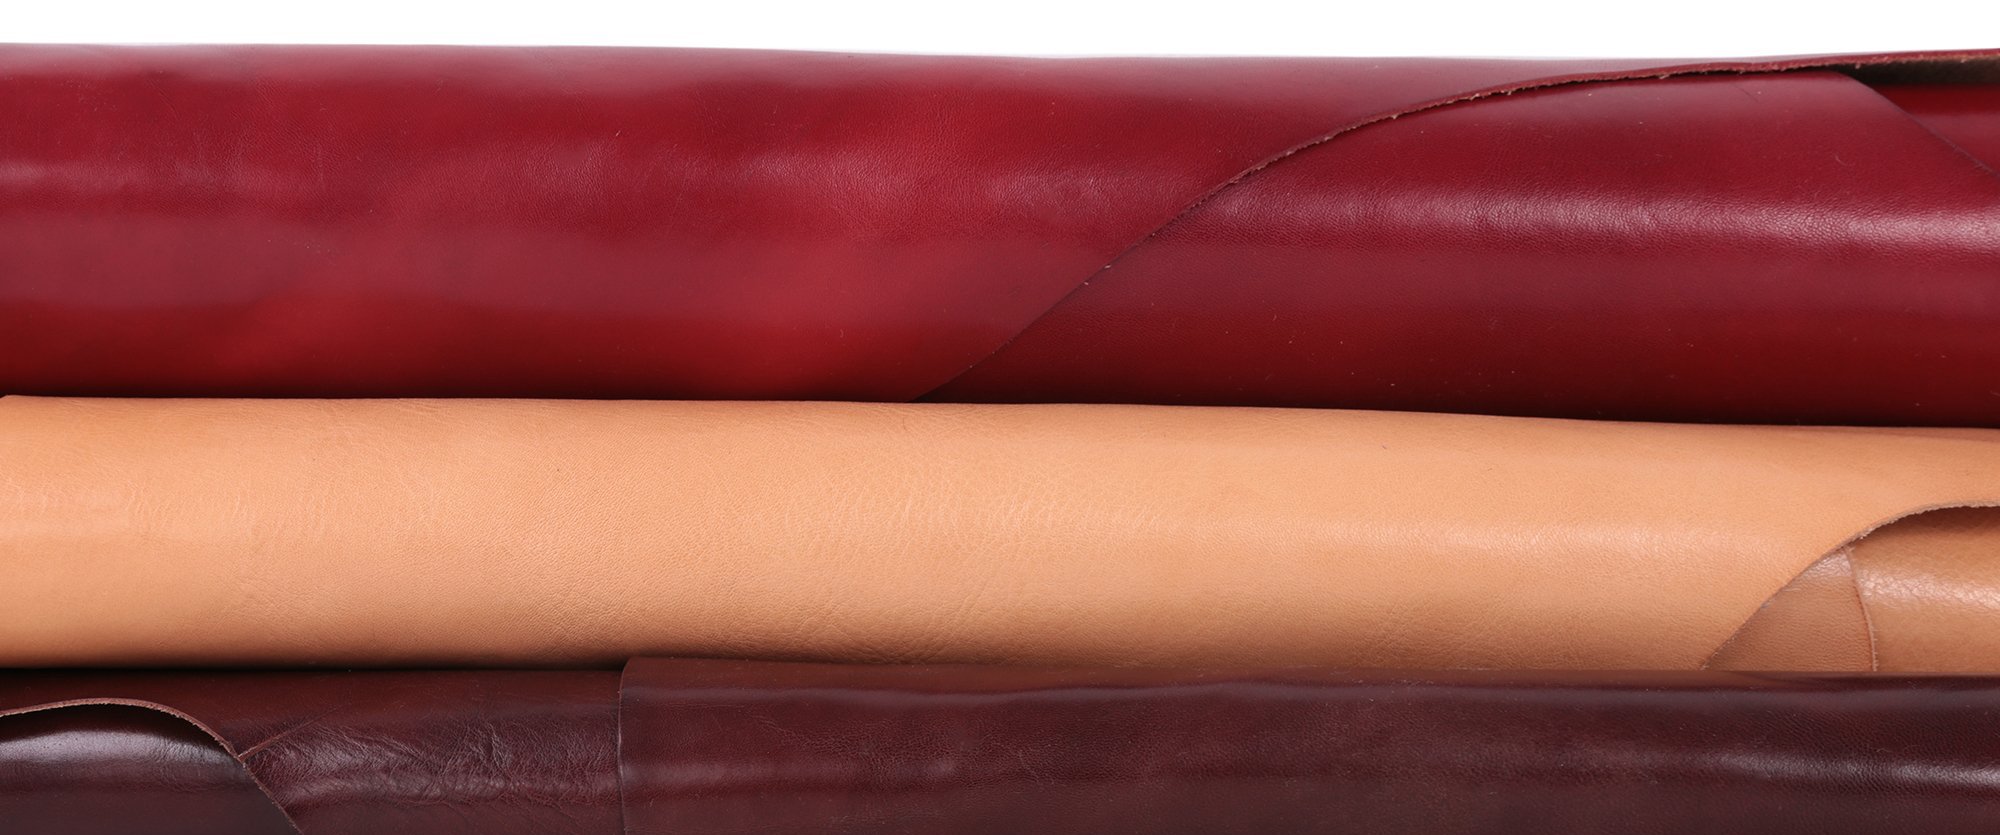 The aging process of natural vegetable tanned leather – LeatherStrata